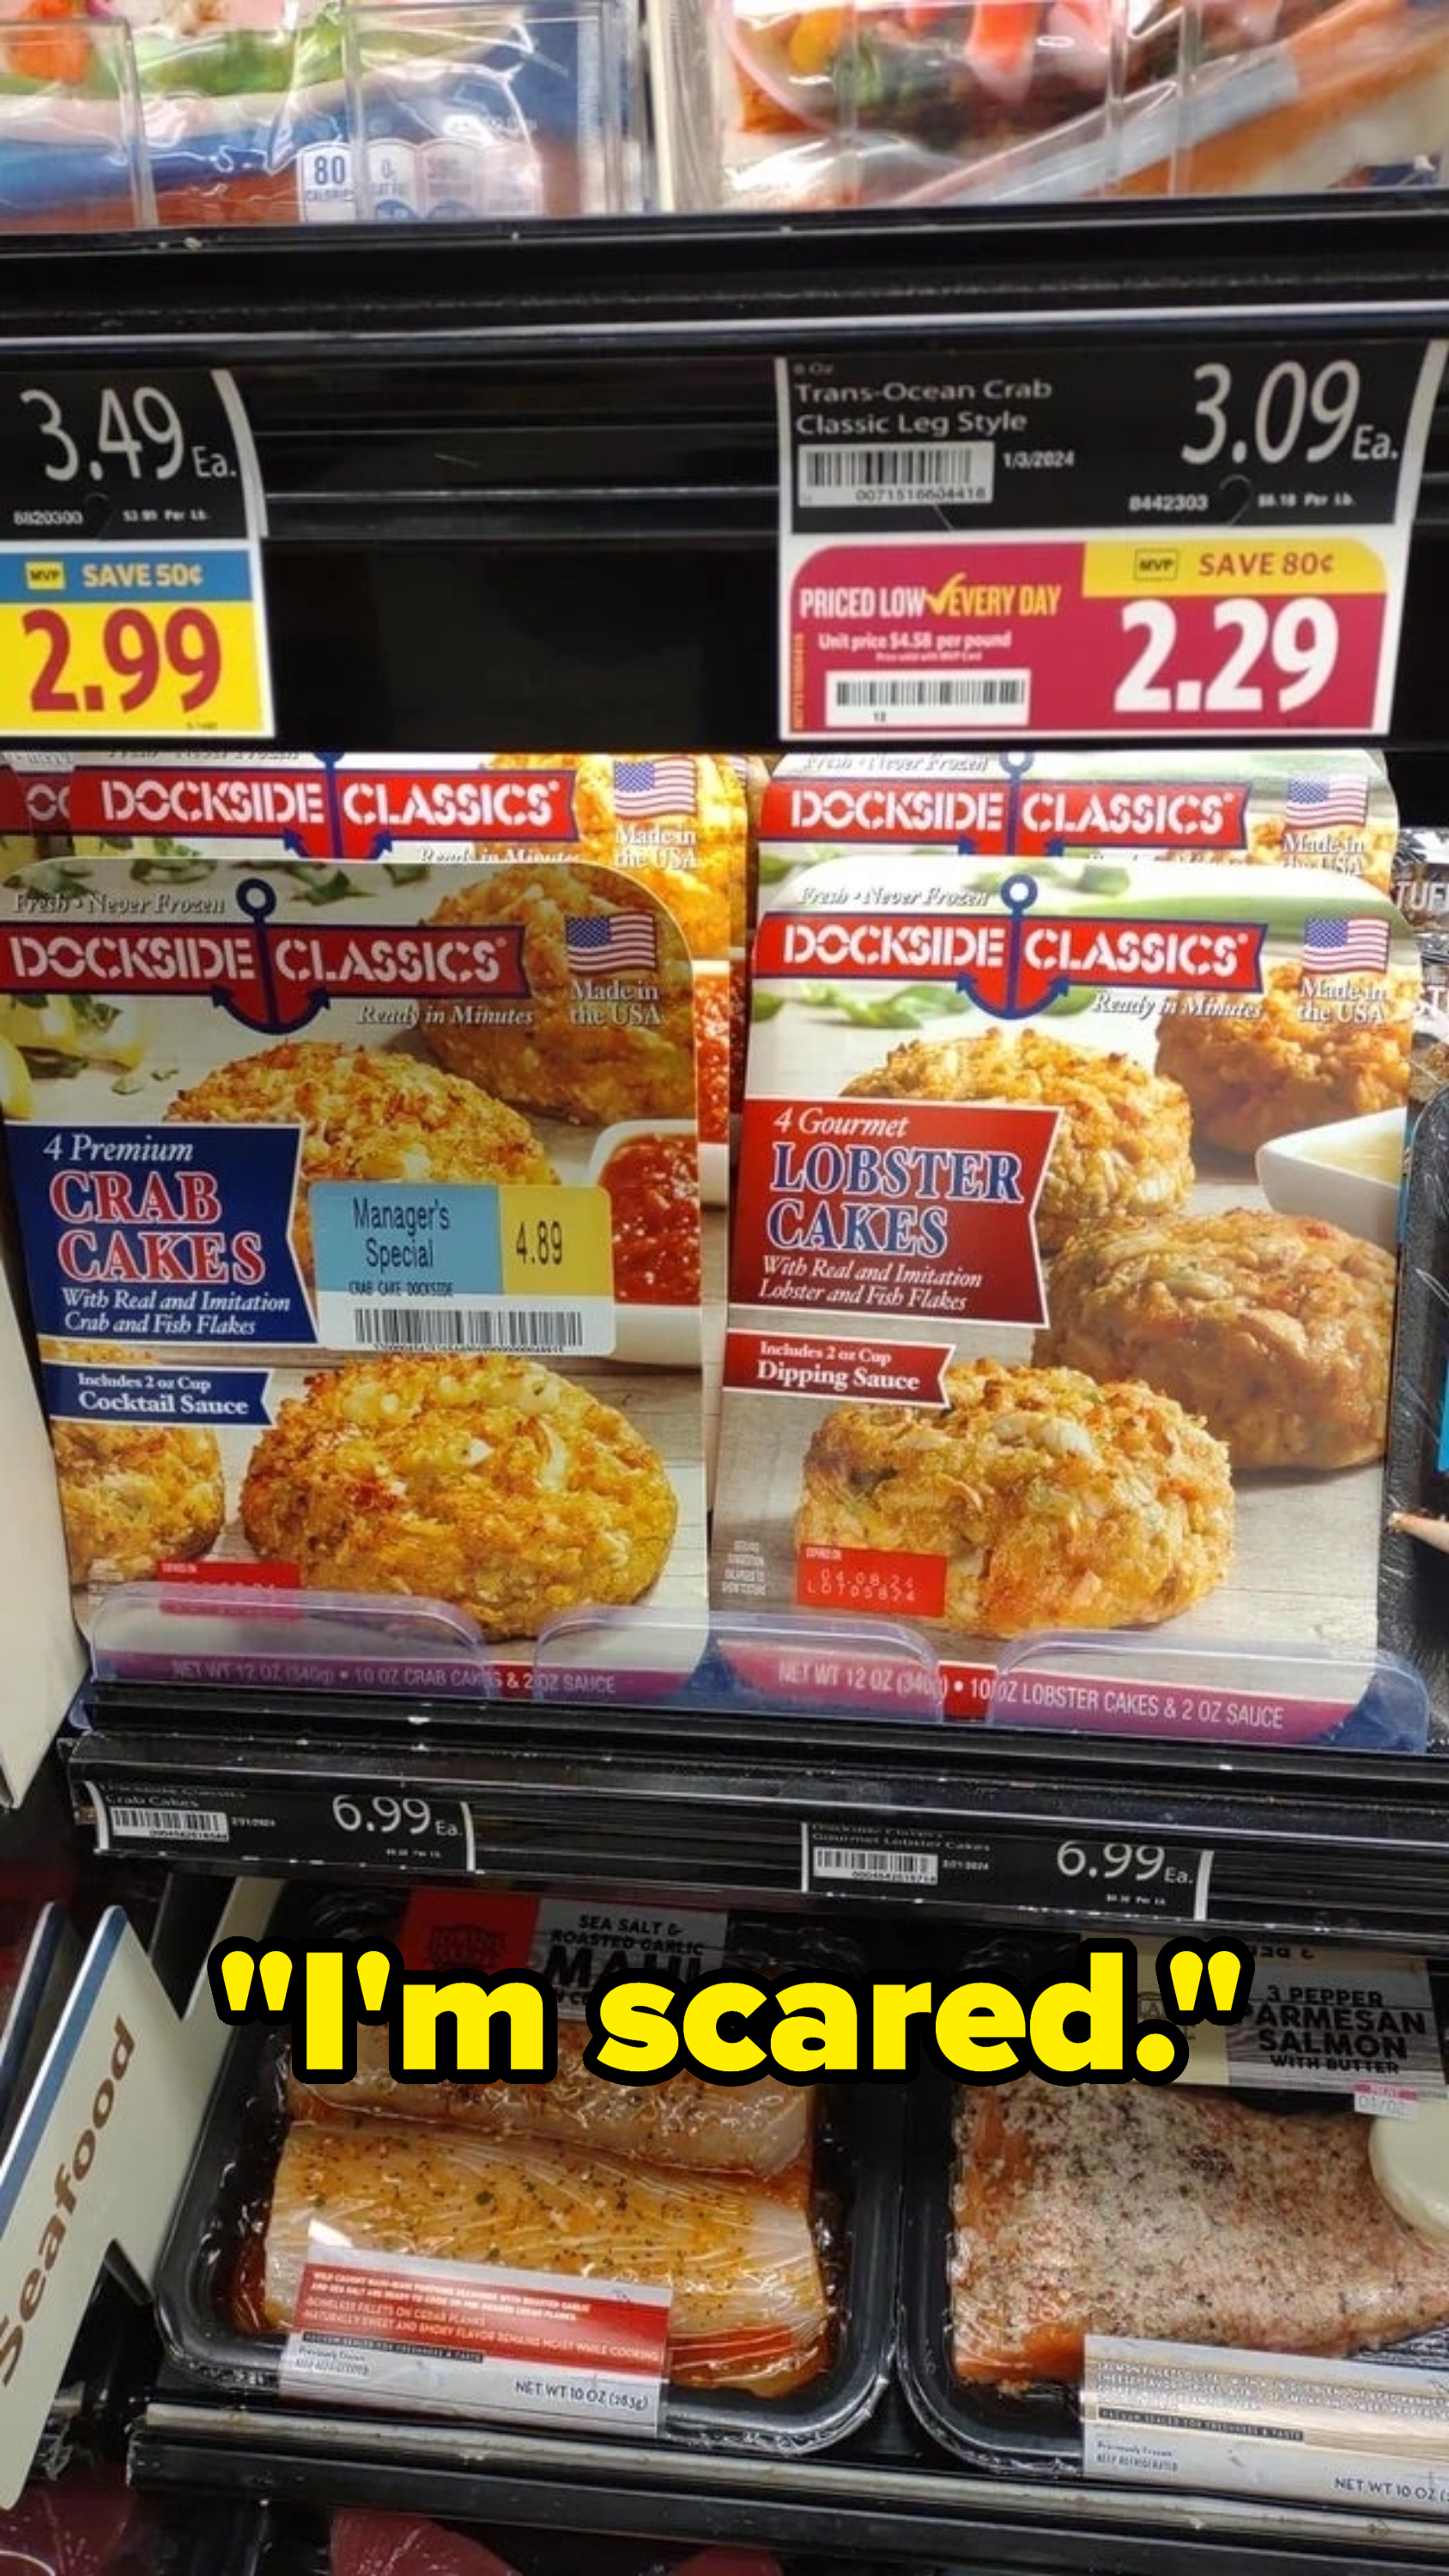 Supermarket freezer with various seafood options including crab cakes and lobster bisque. Prices and brand names visible